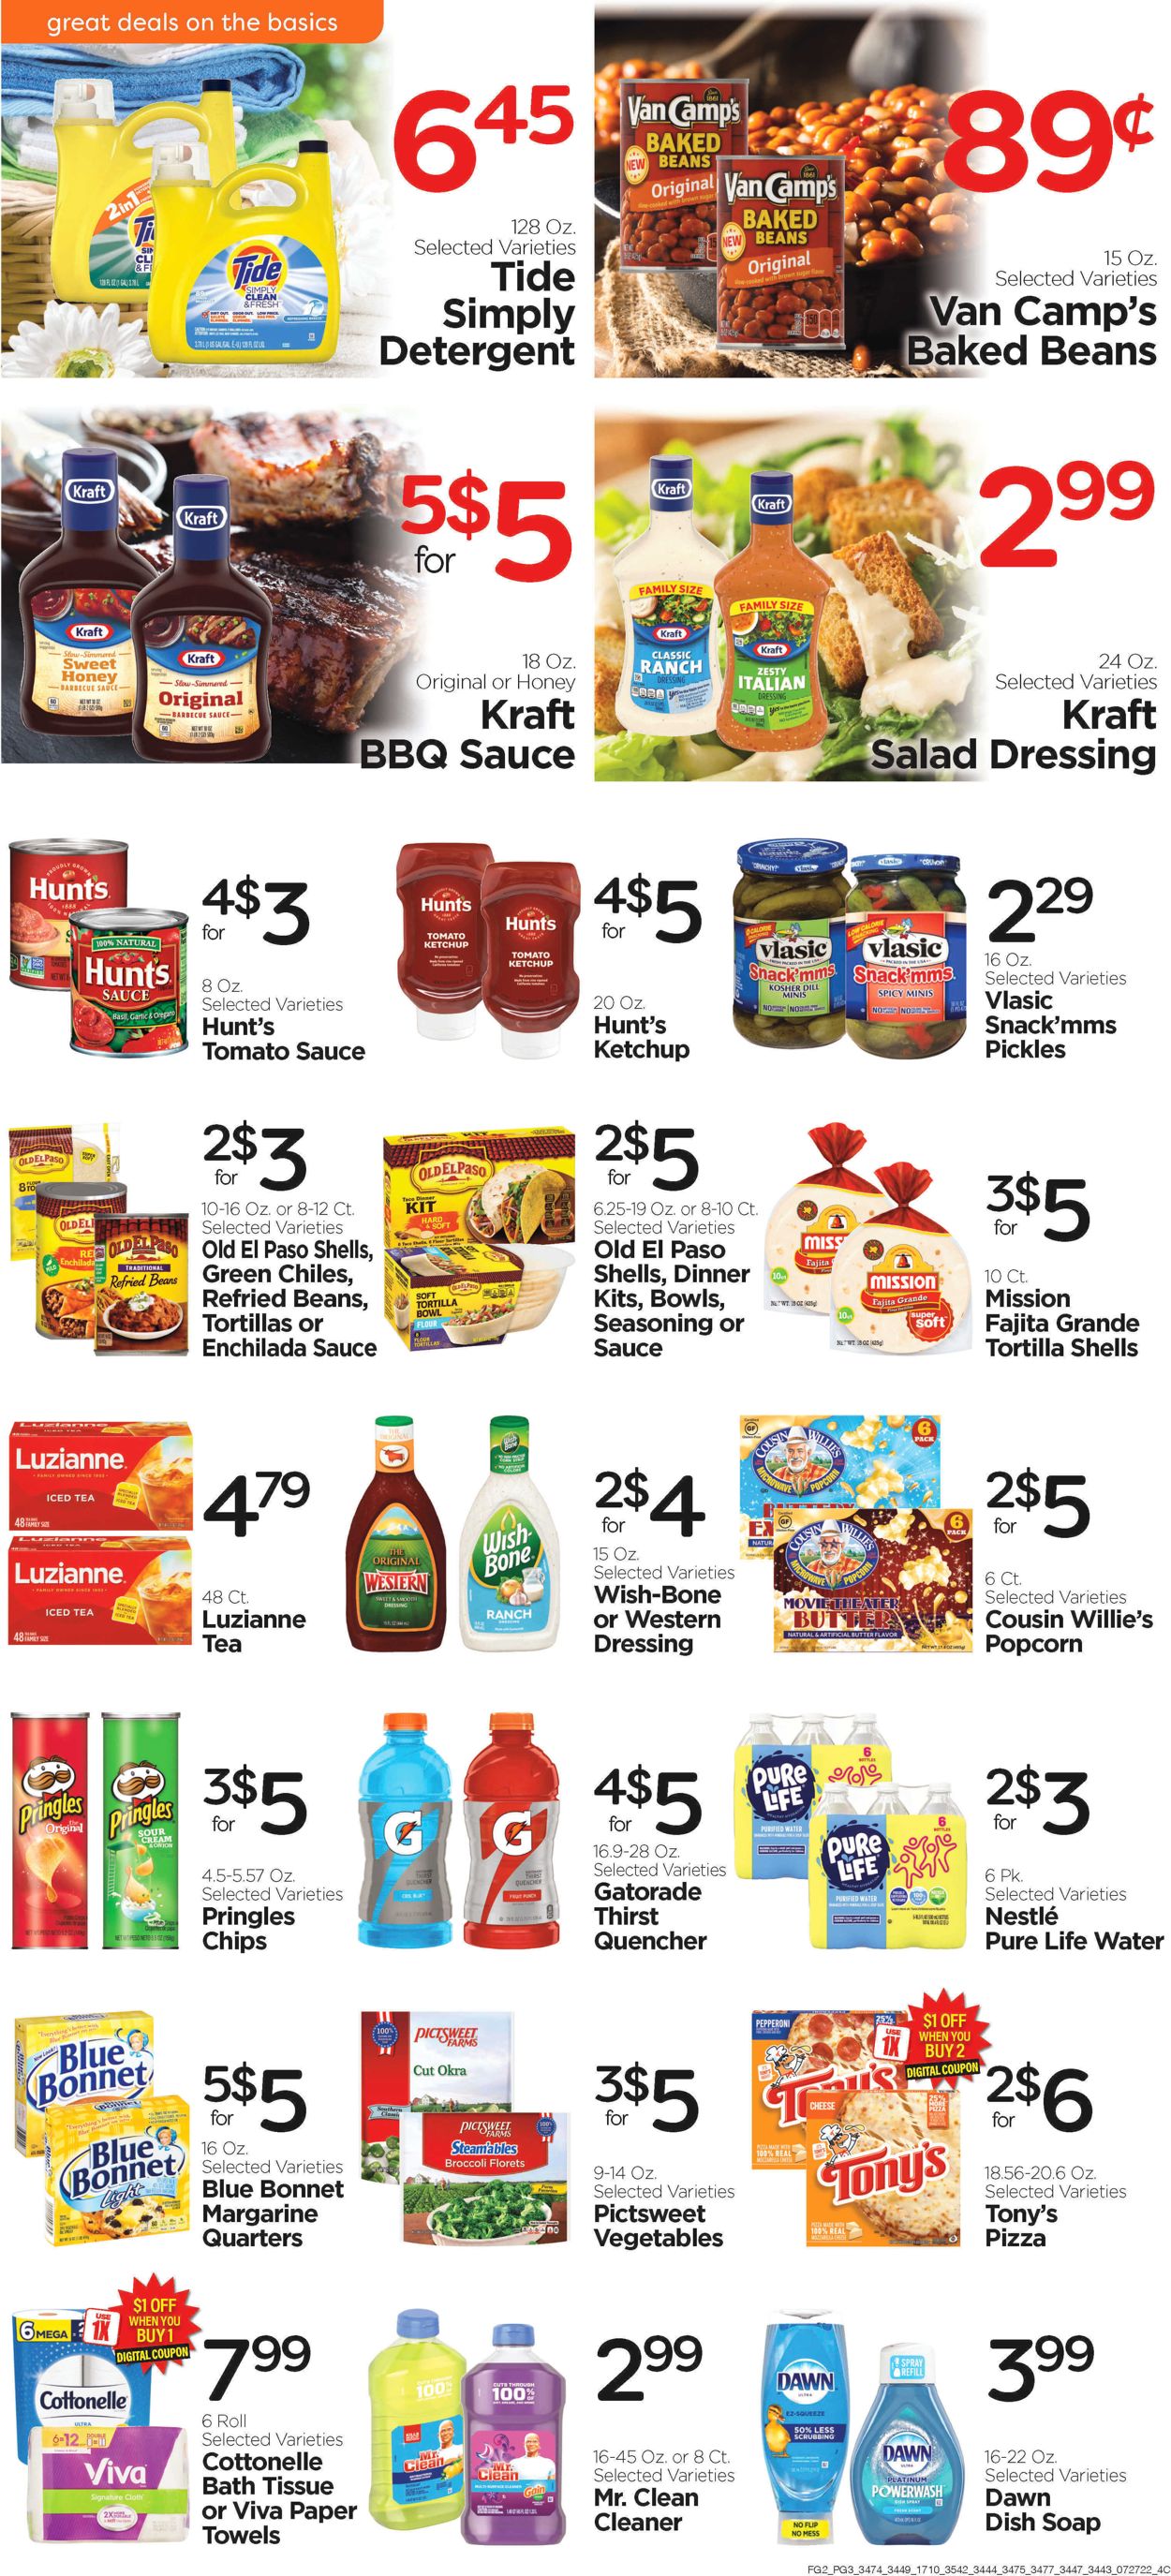 Catalogue Edwards Food Giant from 07/27/2022